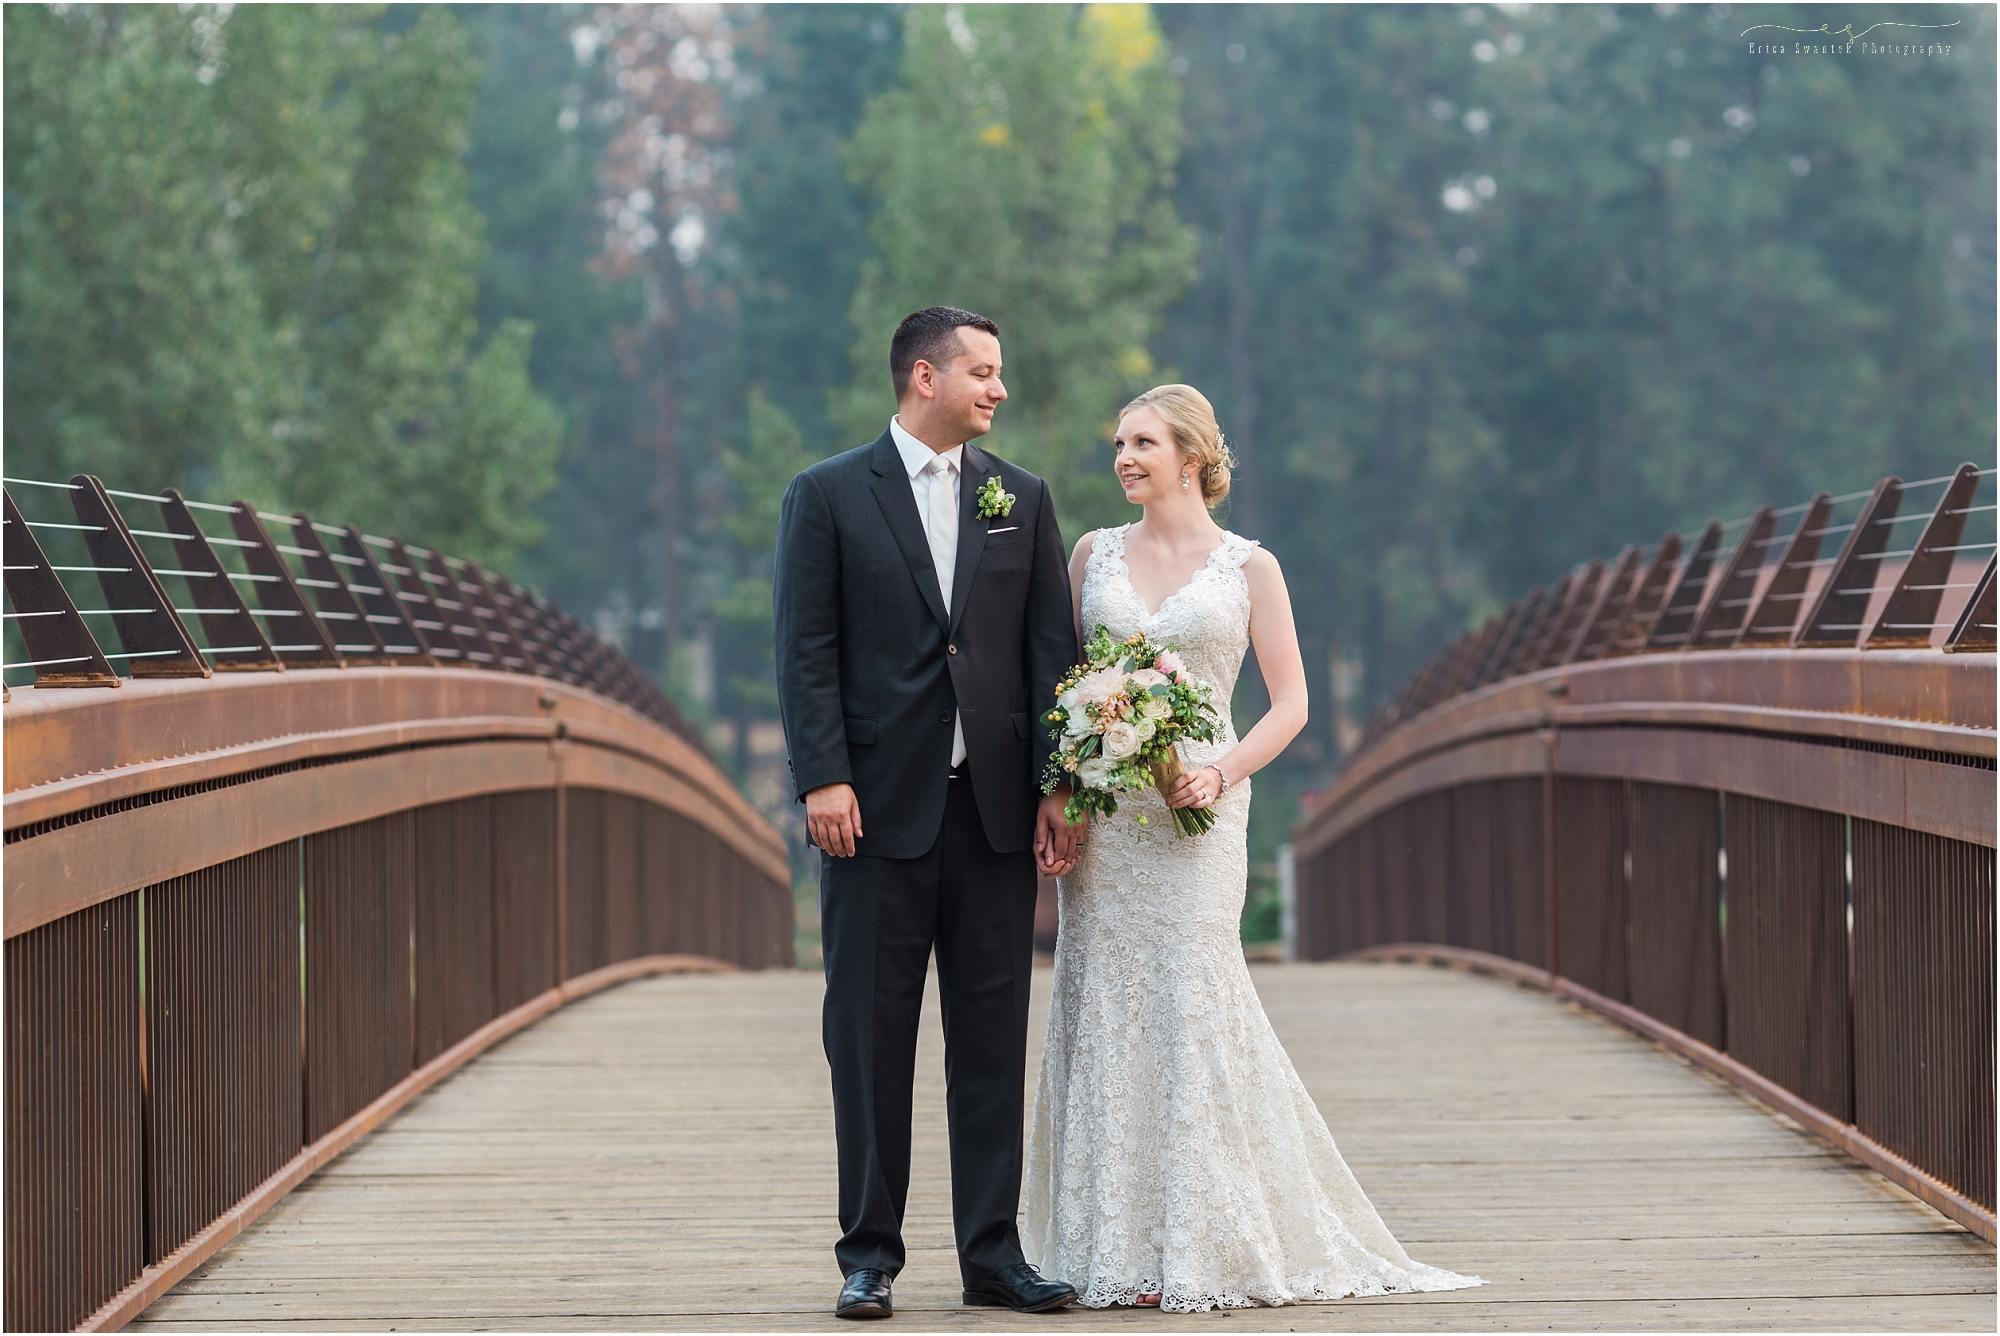 Deschutes Brewery Wedding couple's portraits along river trail in Bend, OR. | Erica Swantek Photography